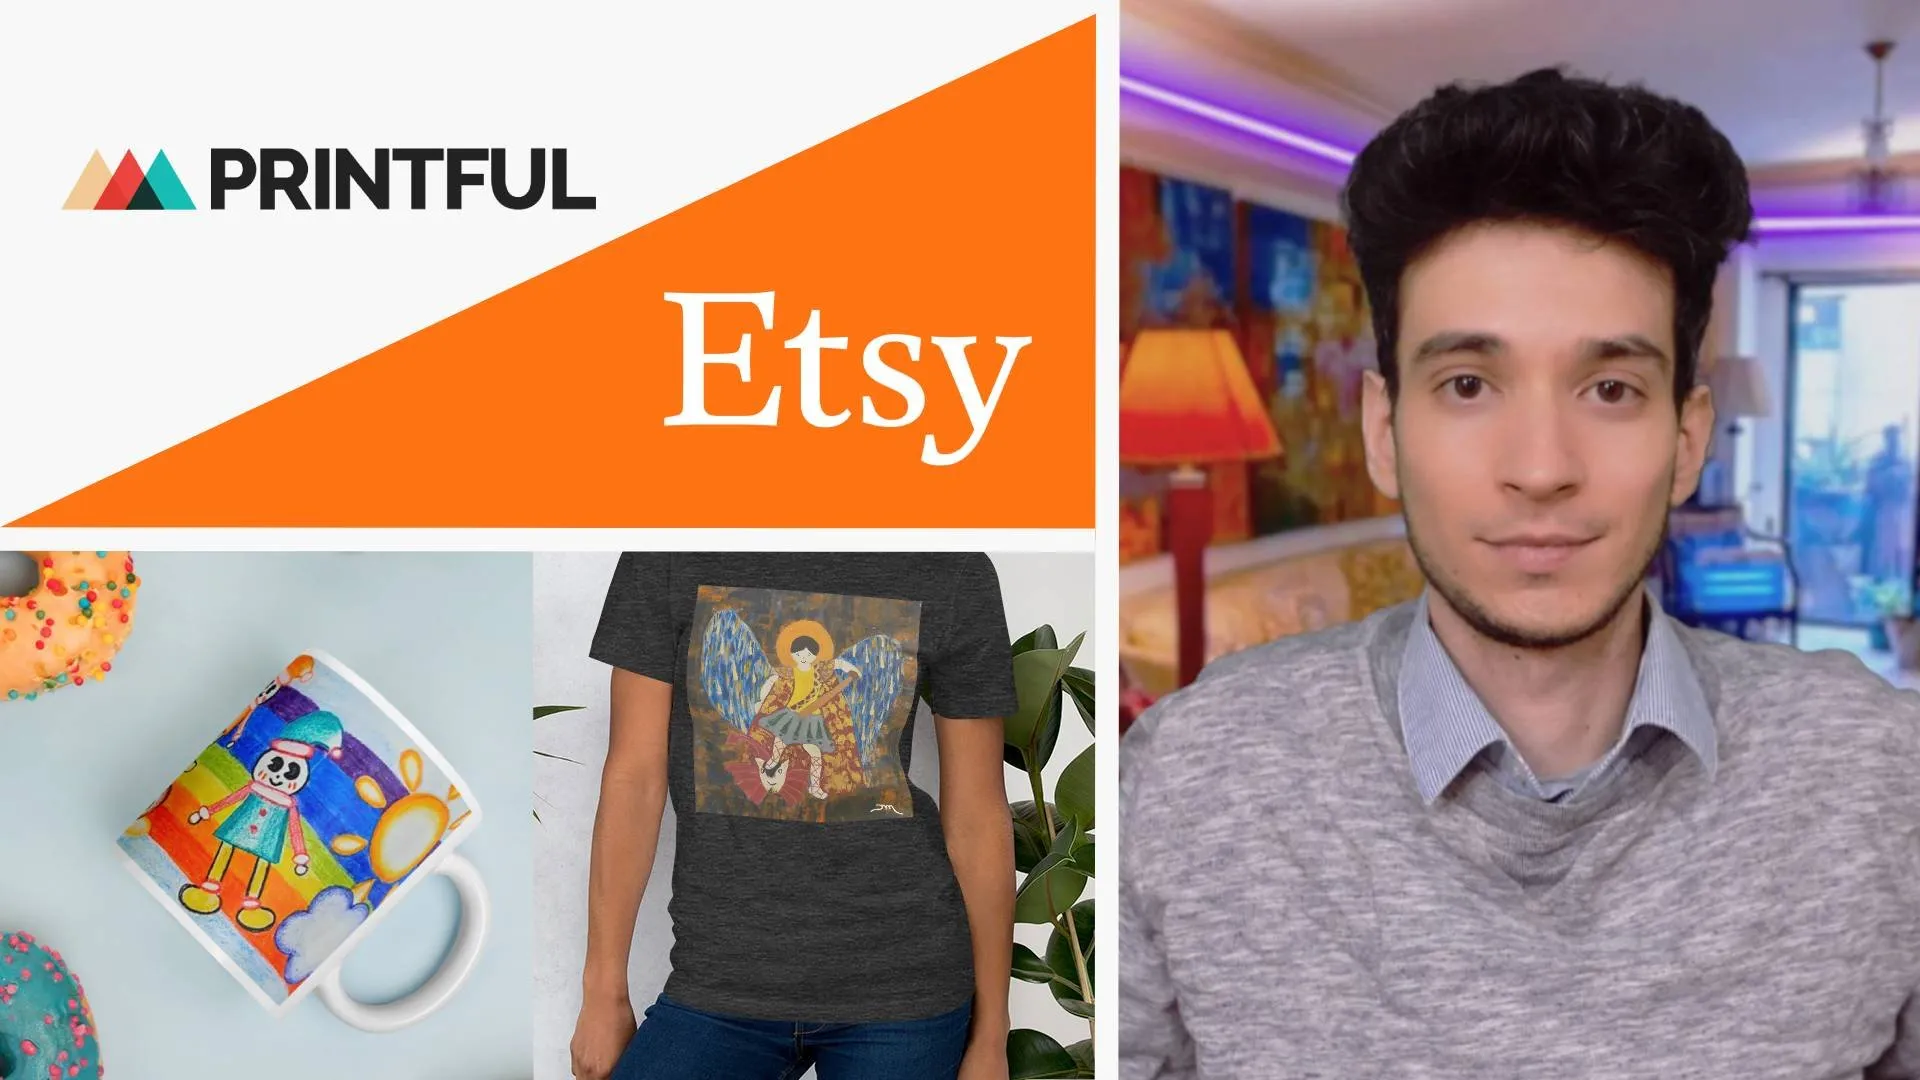 Print-on-demand: Turn your Art into Products and Sell them Online with Etsy and Printful